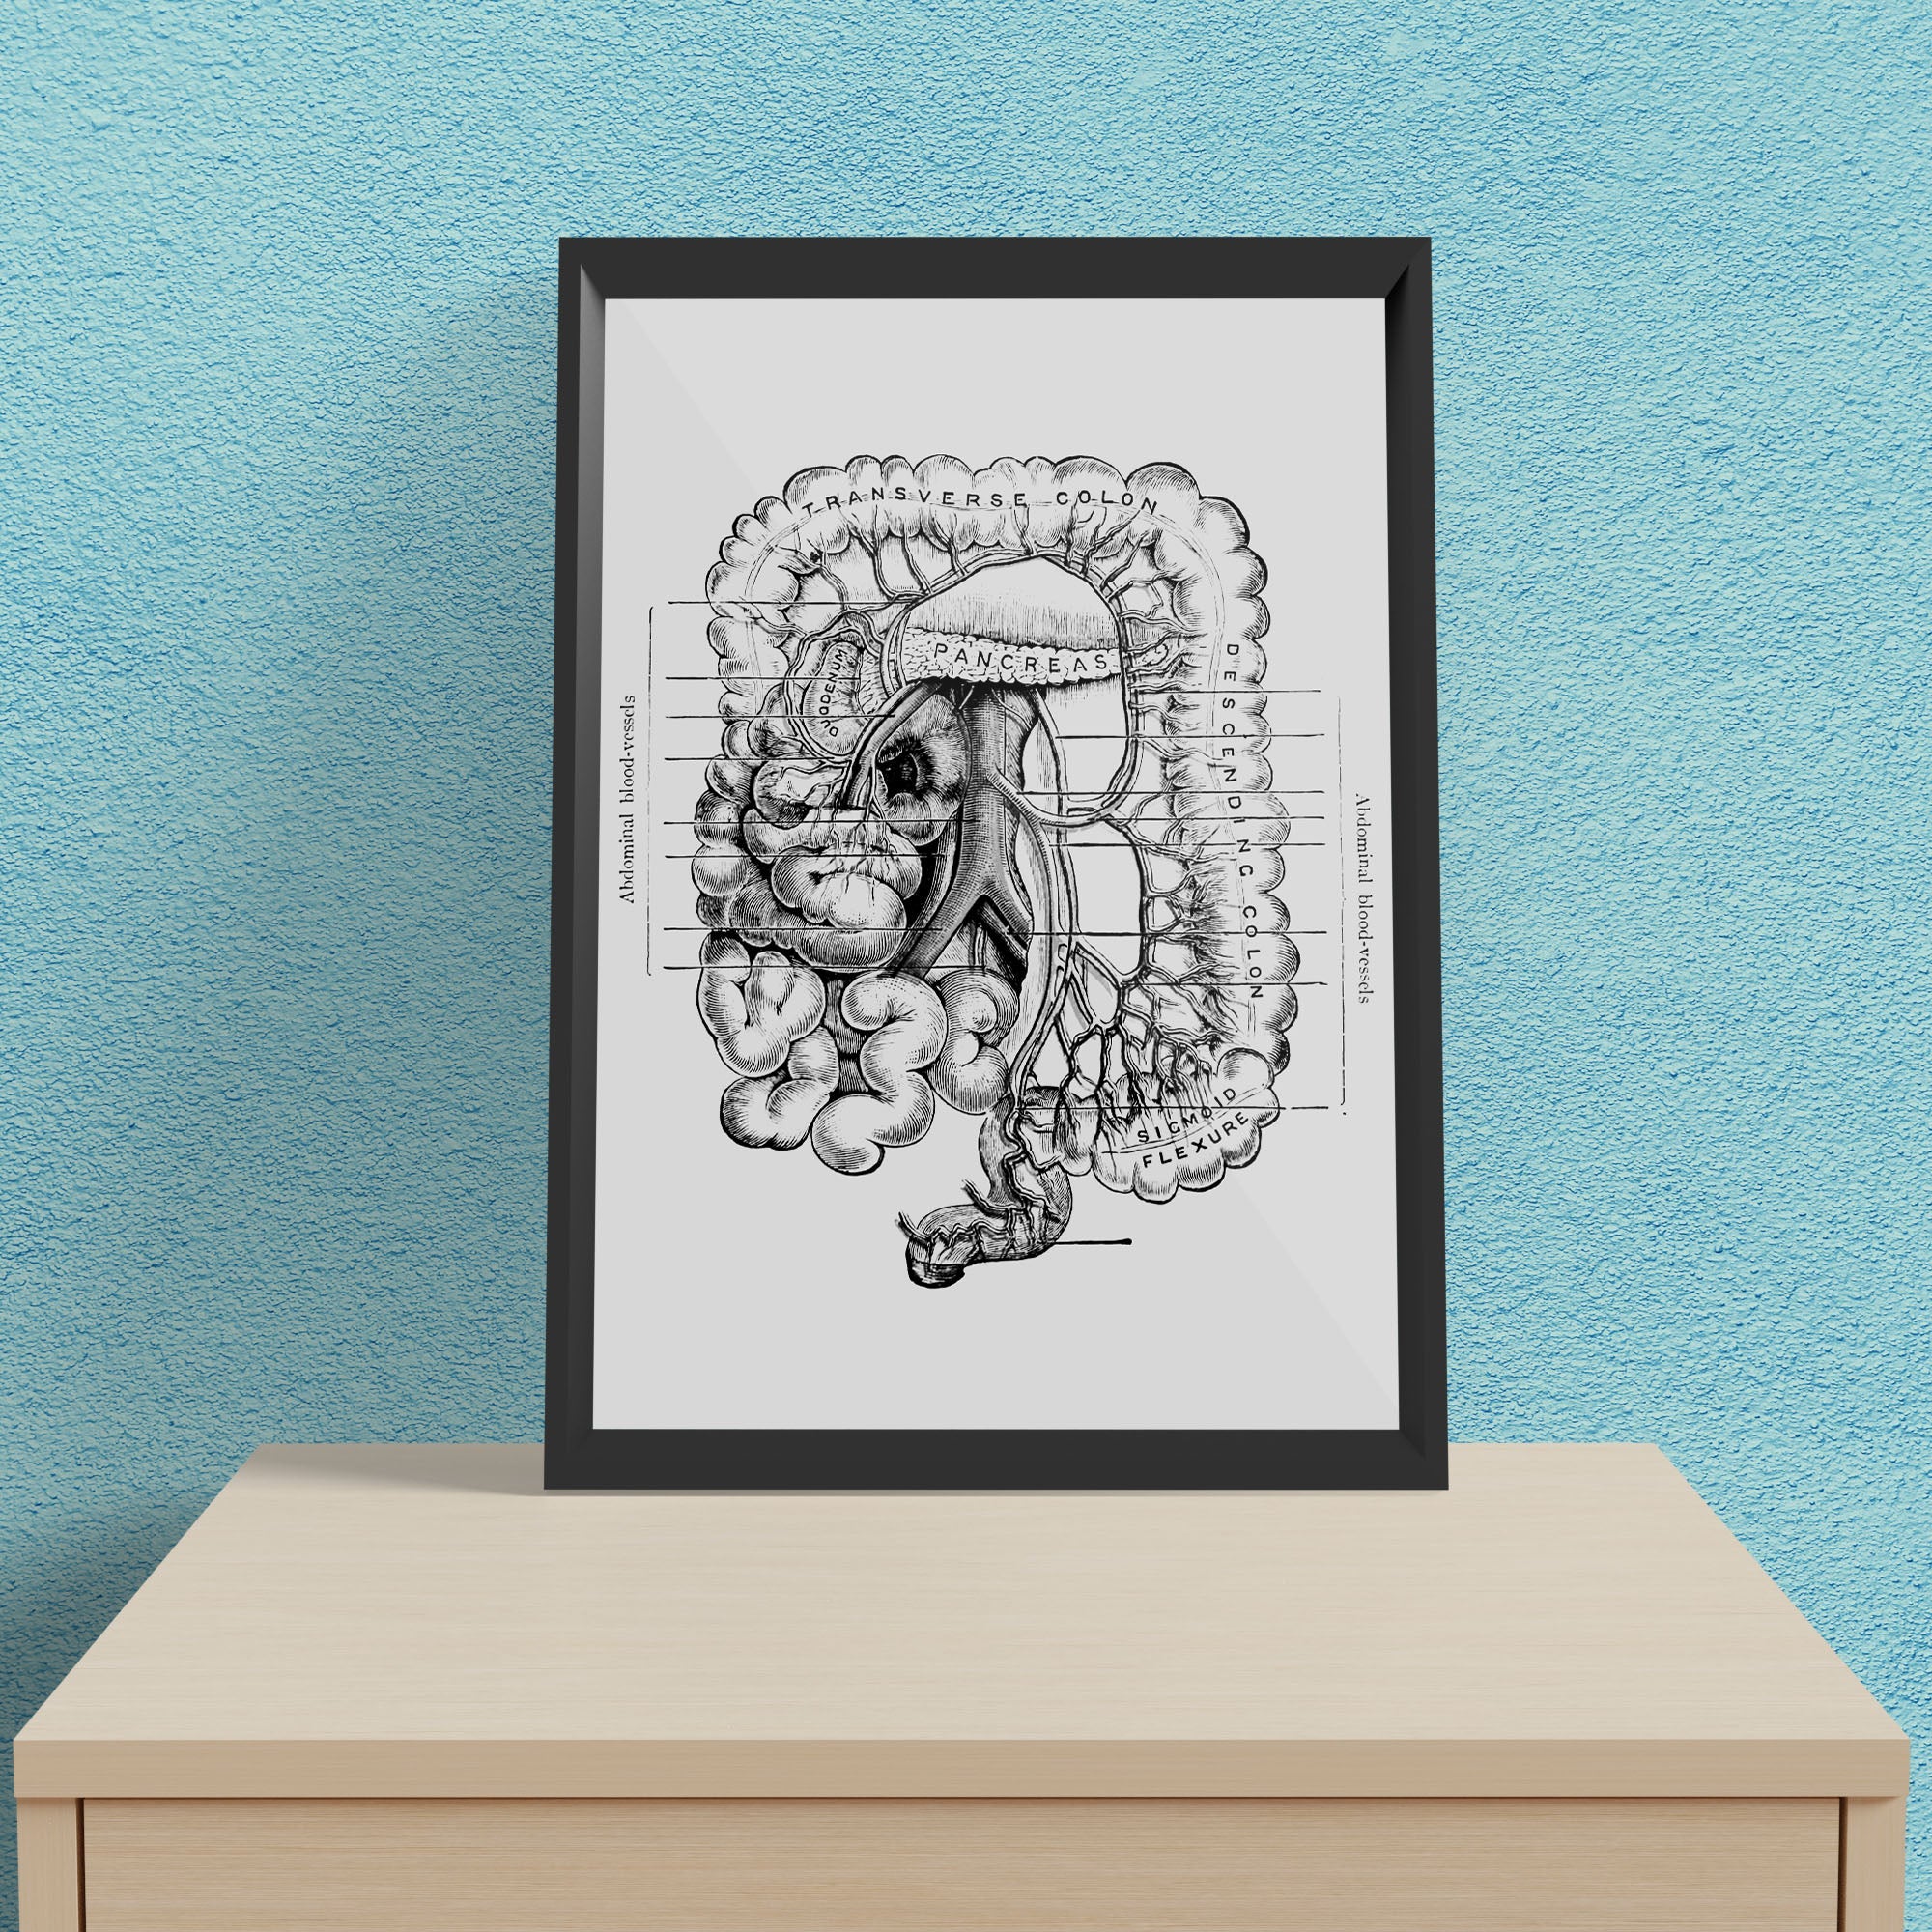 Abdomen Anatomy - Framed Poster For Clinics, Hospitals &amp; Study Rooms